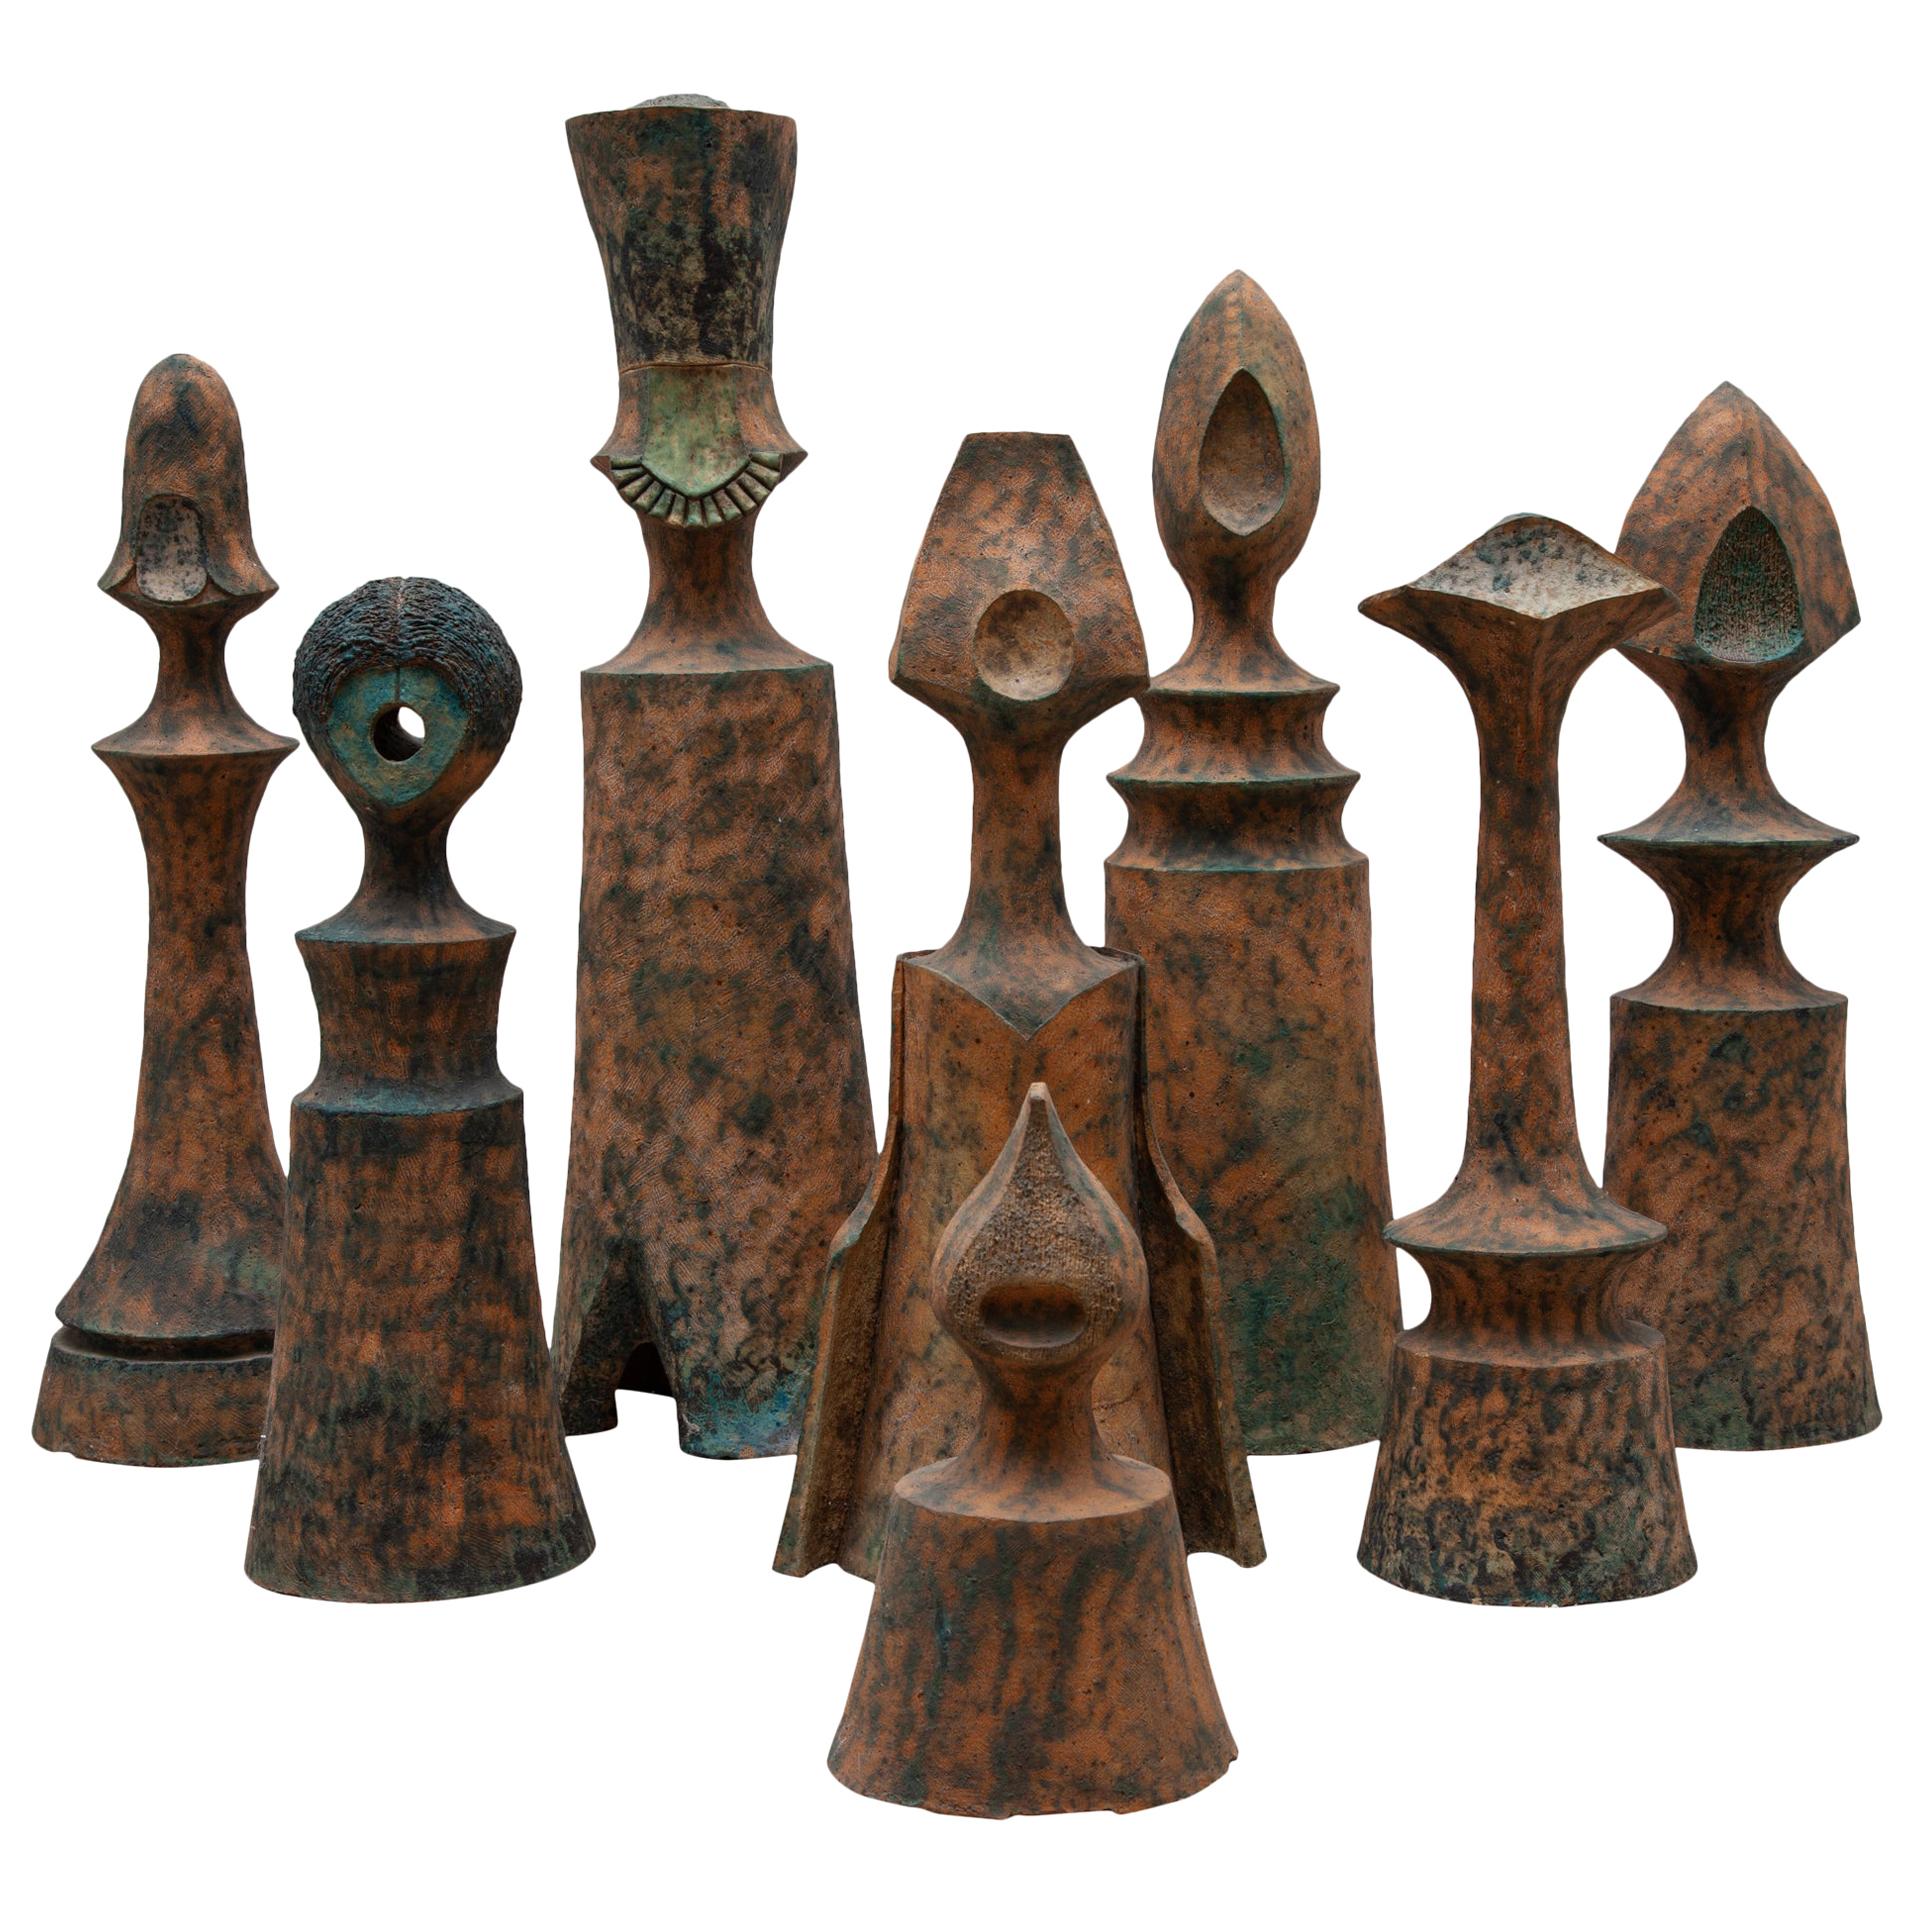 Set of Eight Life-Size Decorative and Sculptural Ceramic Chess Pieces, 1970s